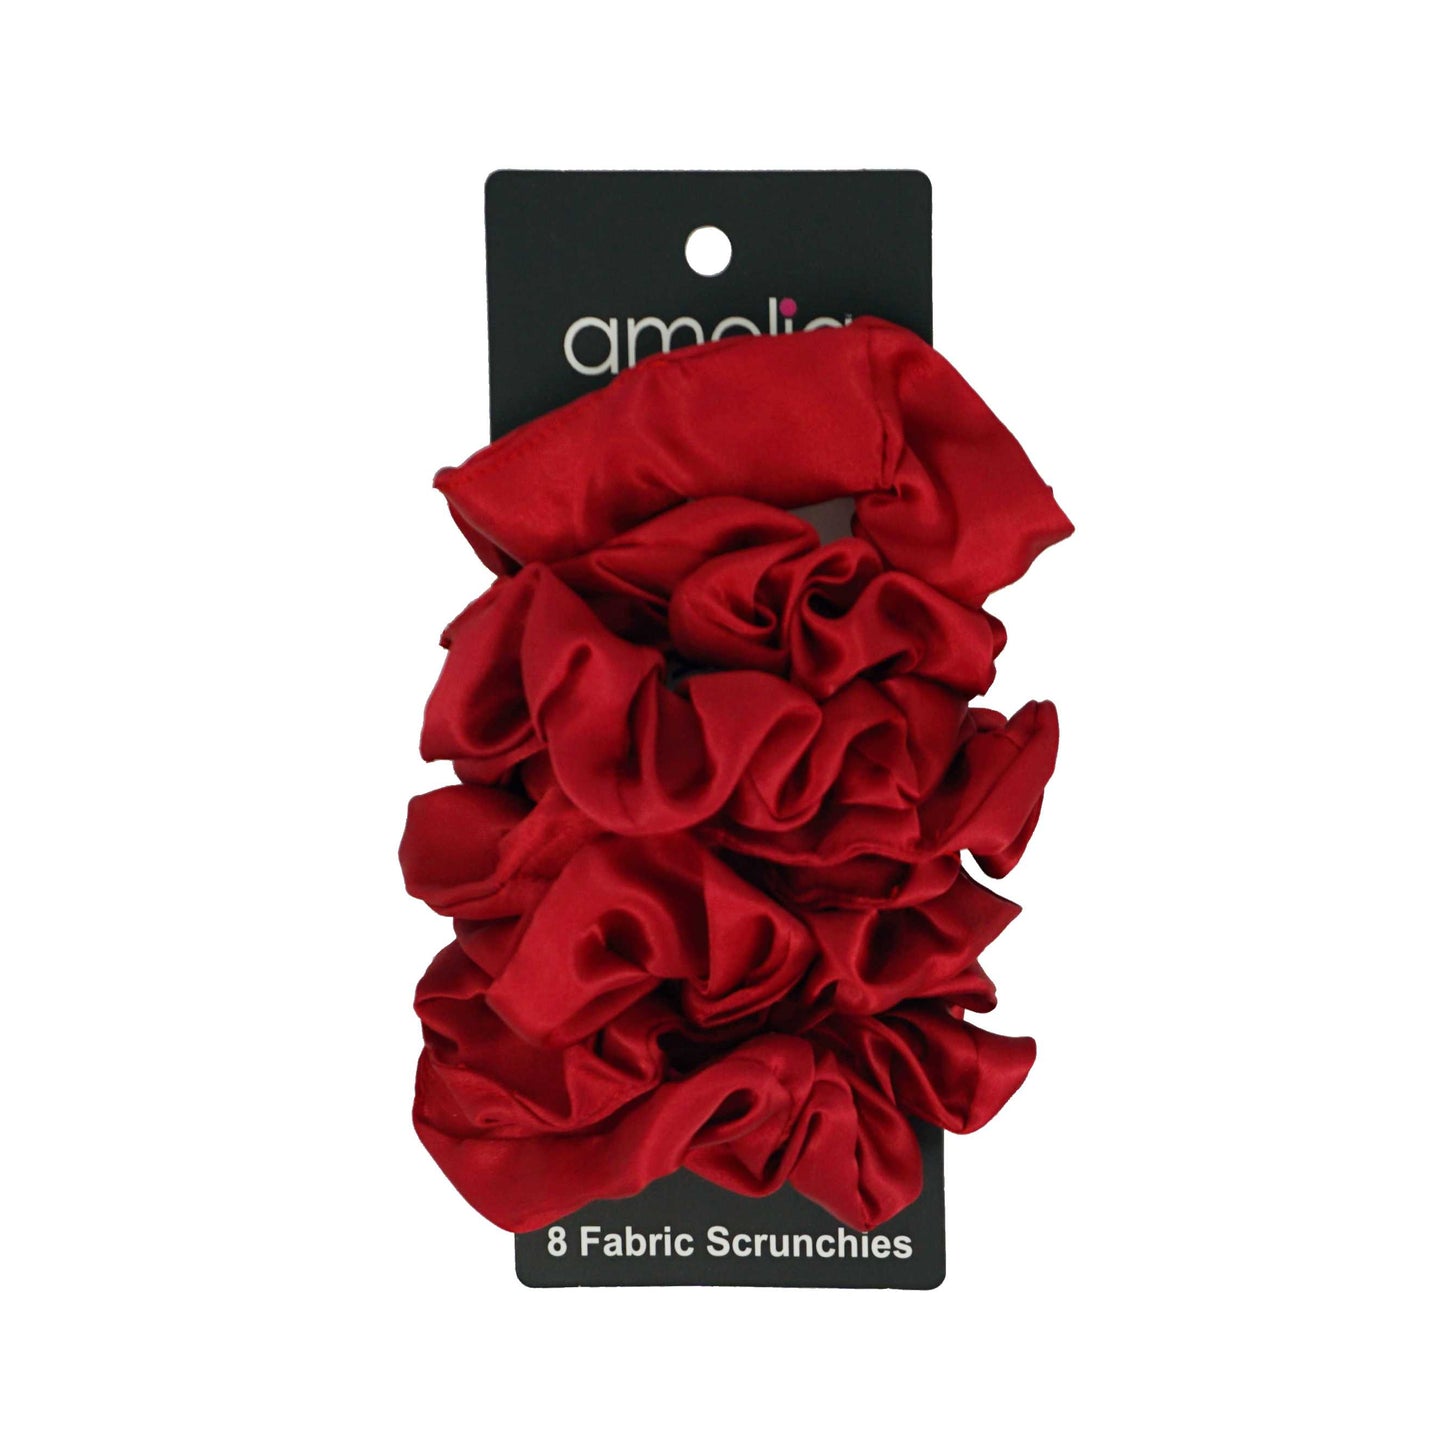 Amelia Beauty Products, Burnt Red Satin Scrunchies, 3.5in Diameter, Gentle on Hair, Strong Hold, No Snag, No Dents or Creases. 8 Pack